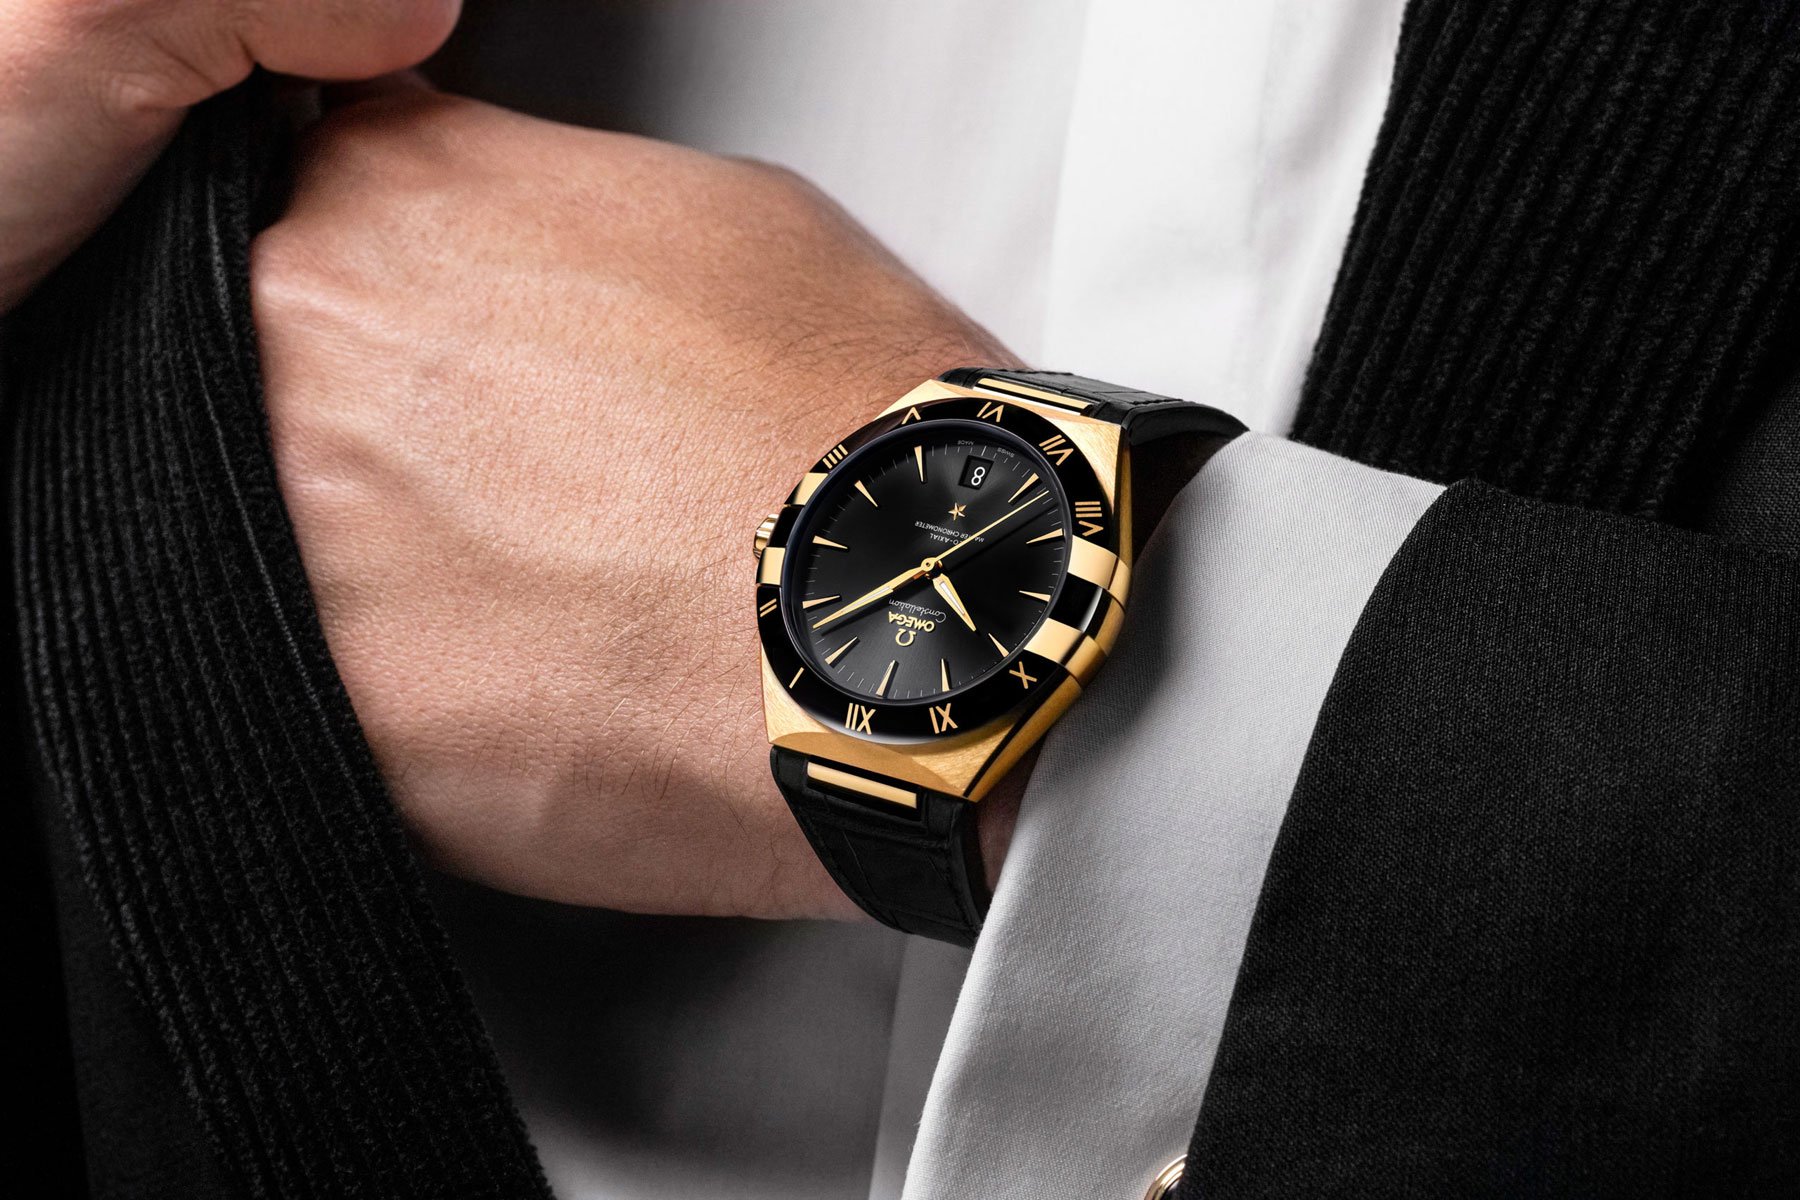 A complete review of Omega's new timepieces